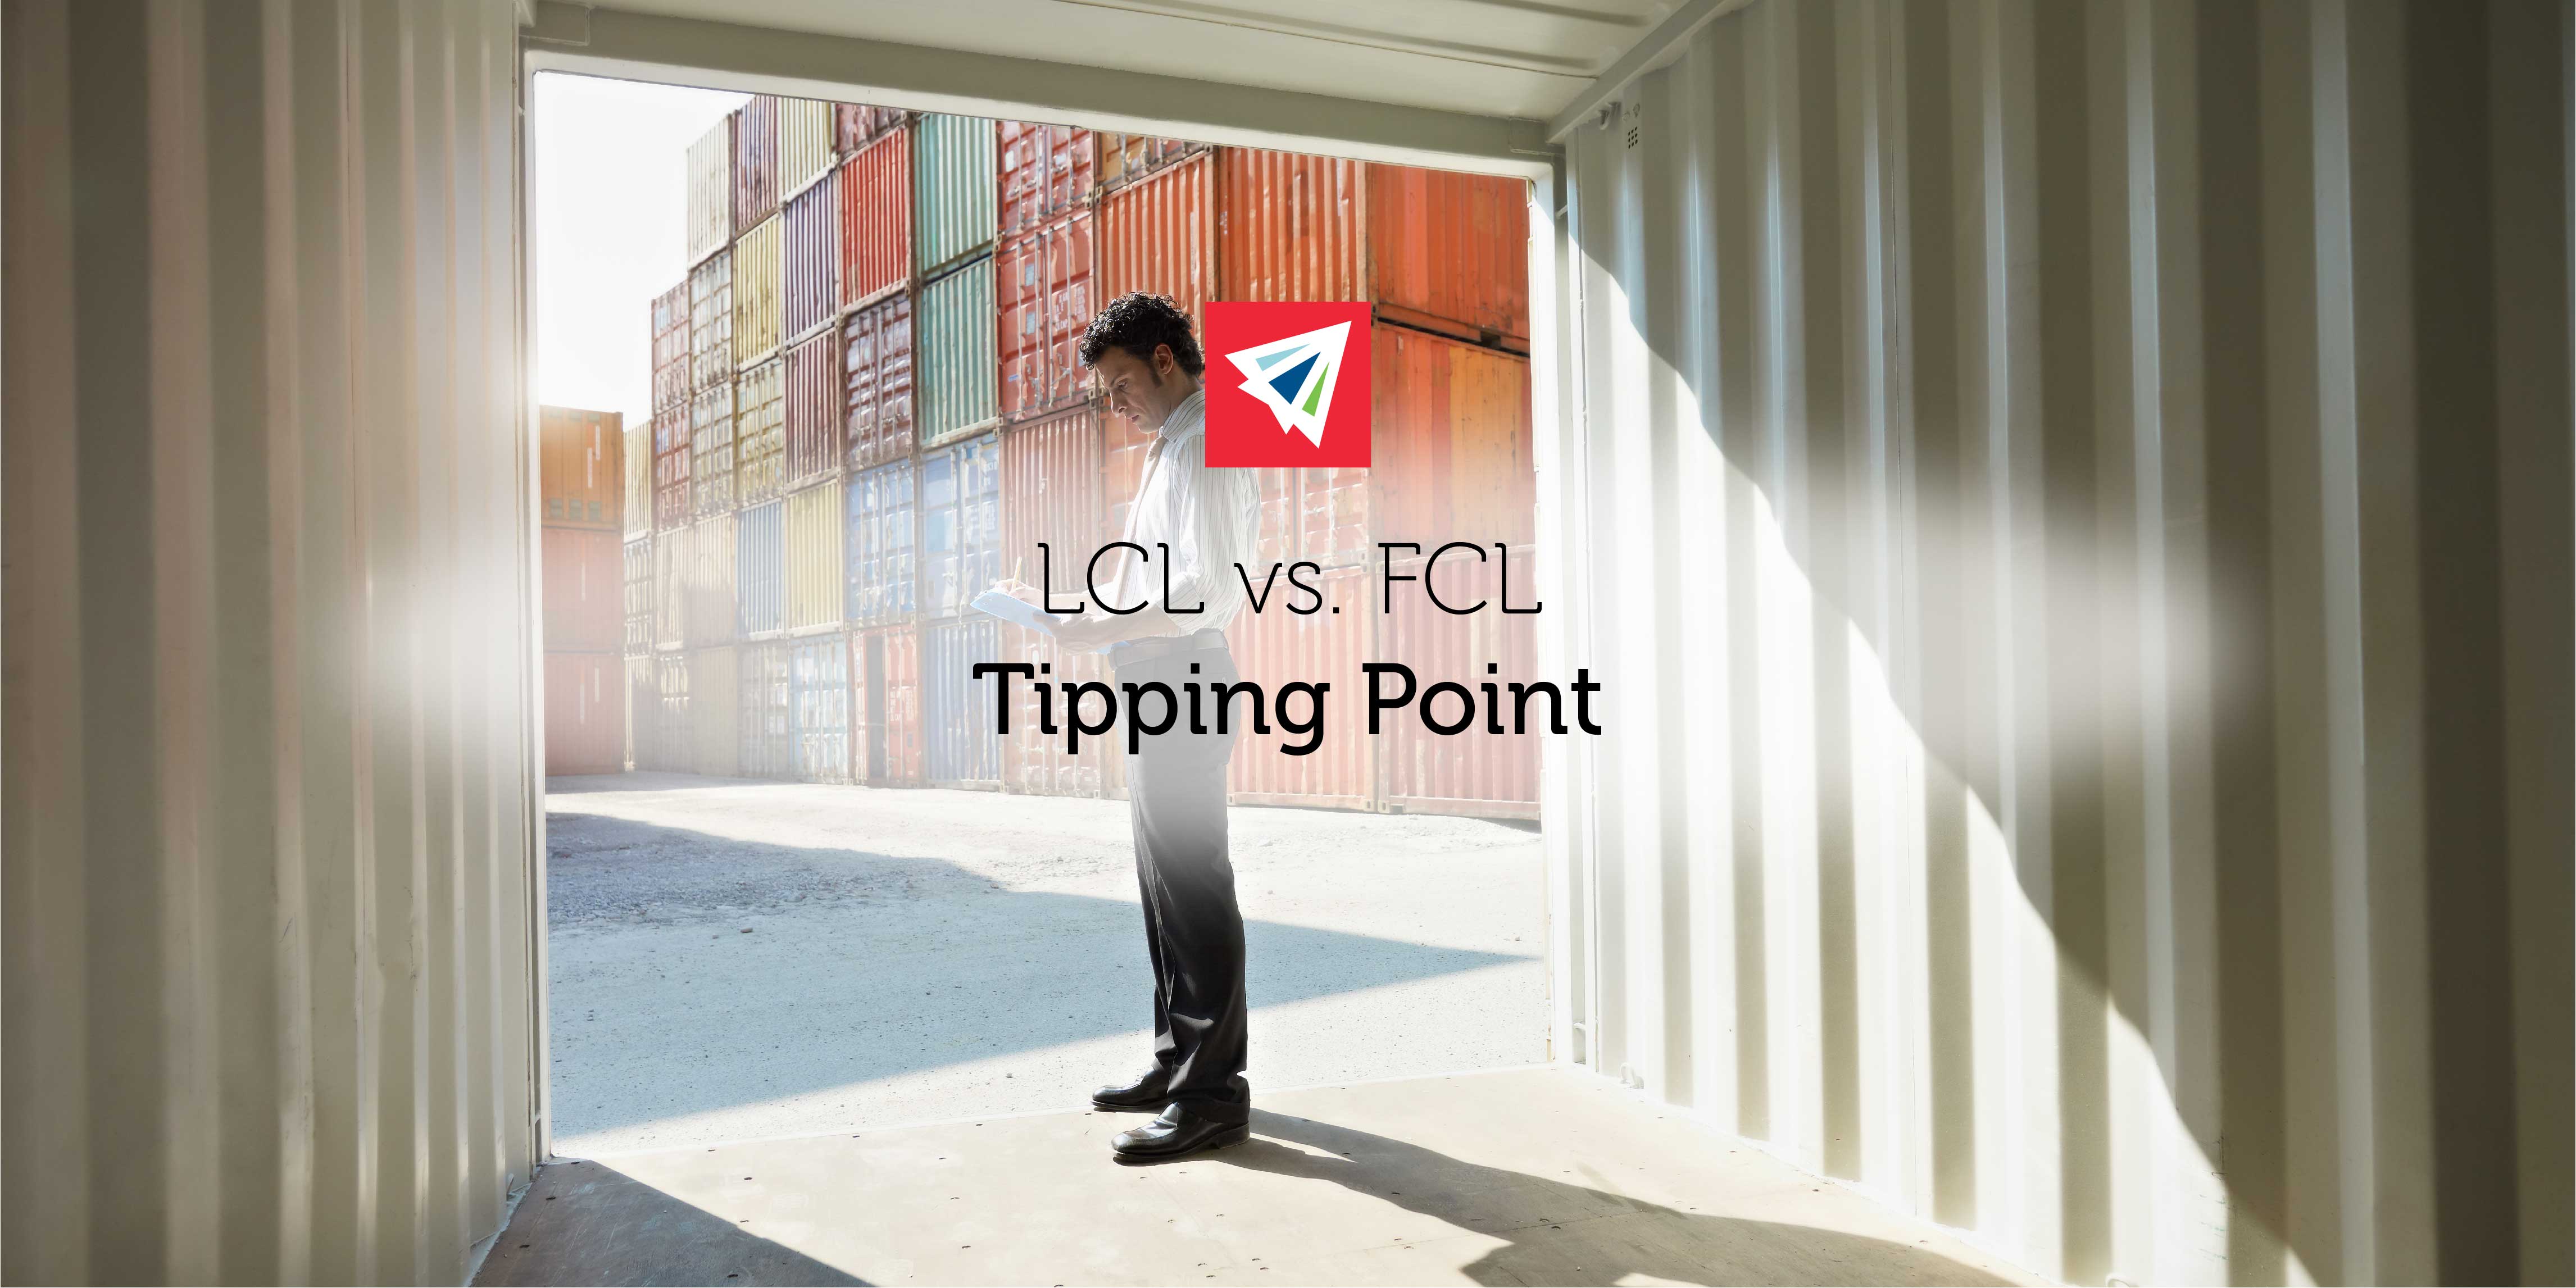 FCL vs. LCL Tipping Point